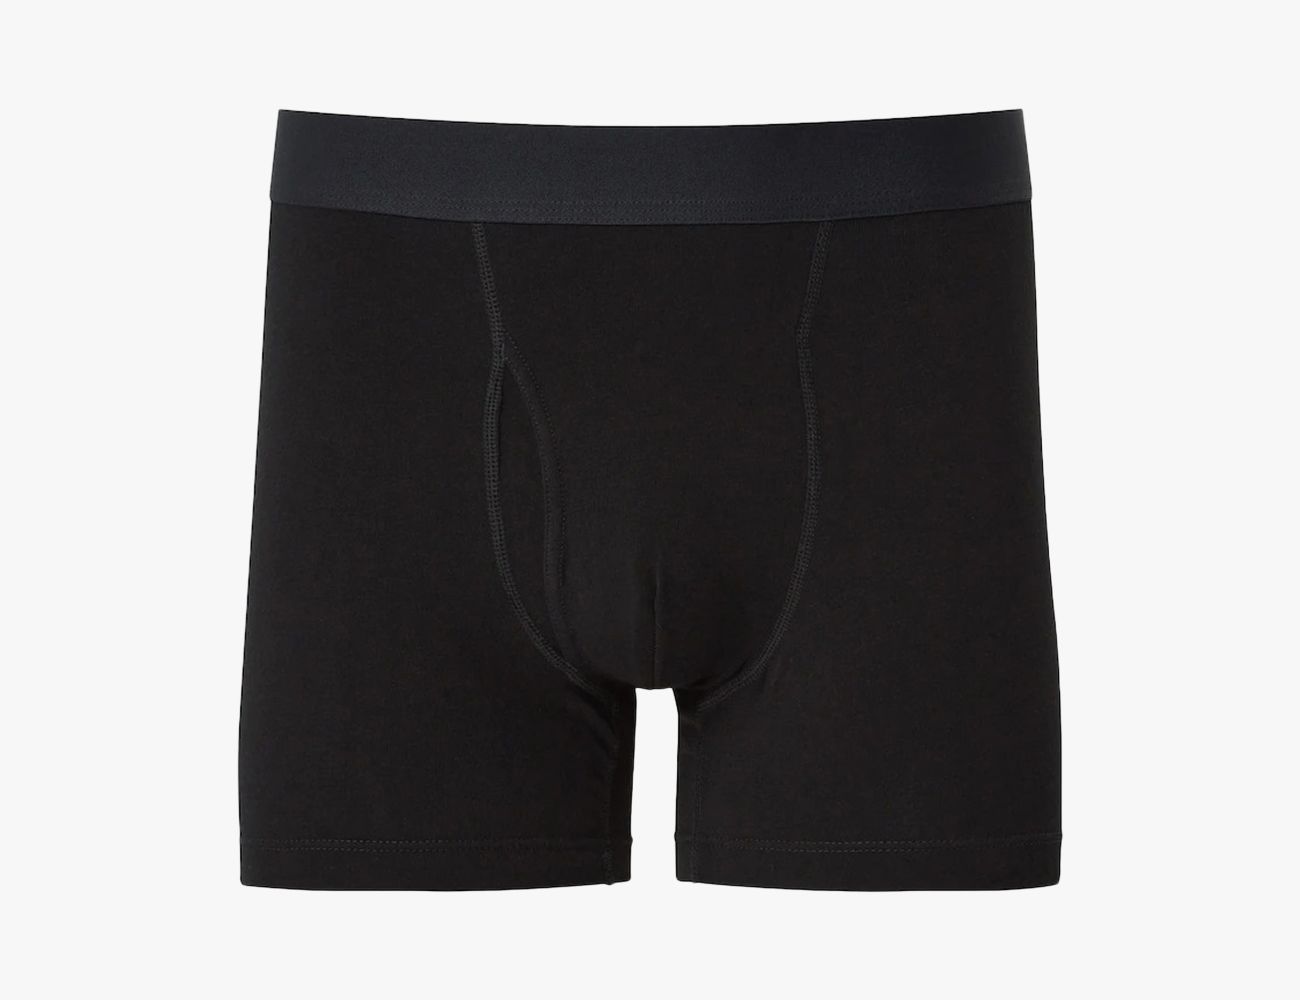 The Best (and Most Comfortable) Underwear for Men